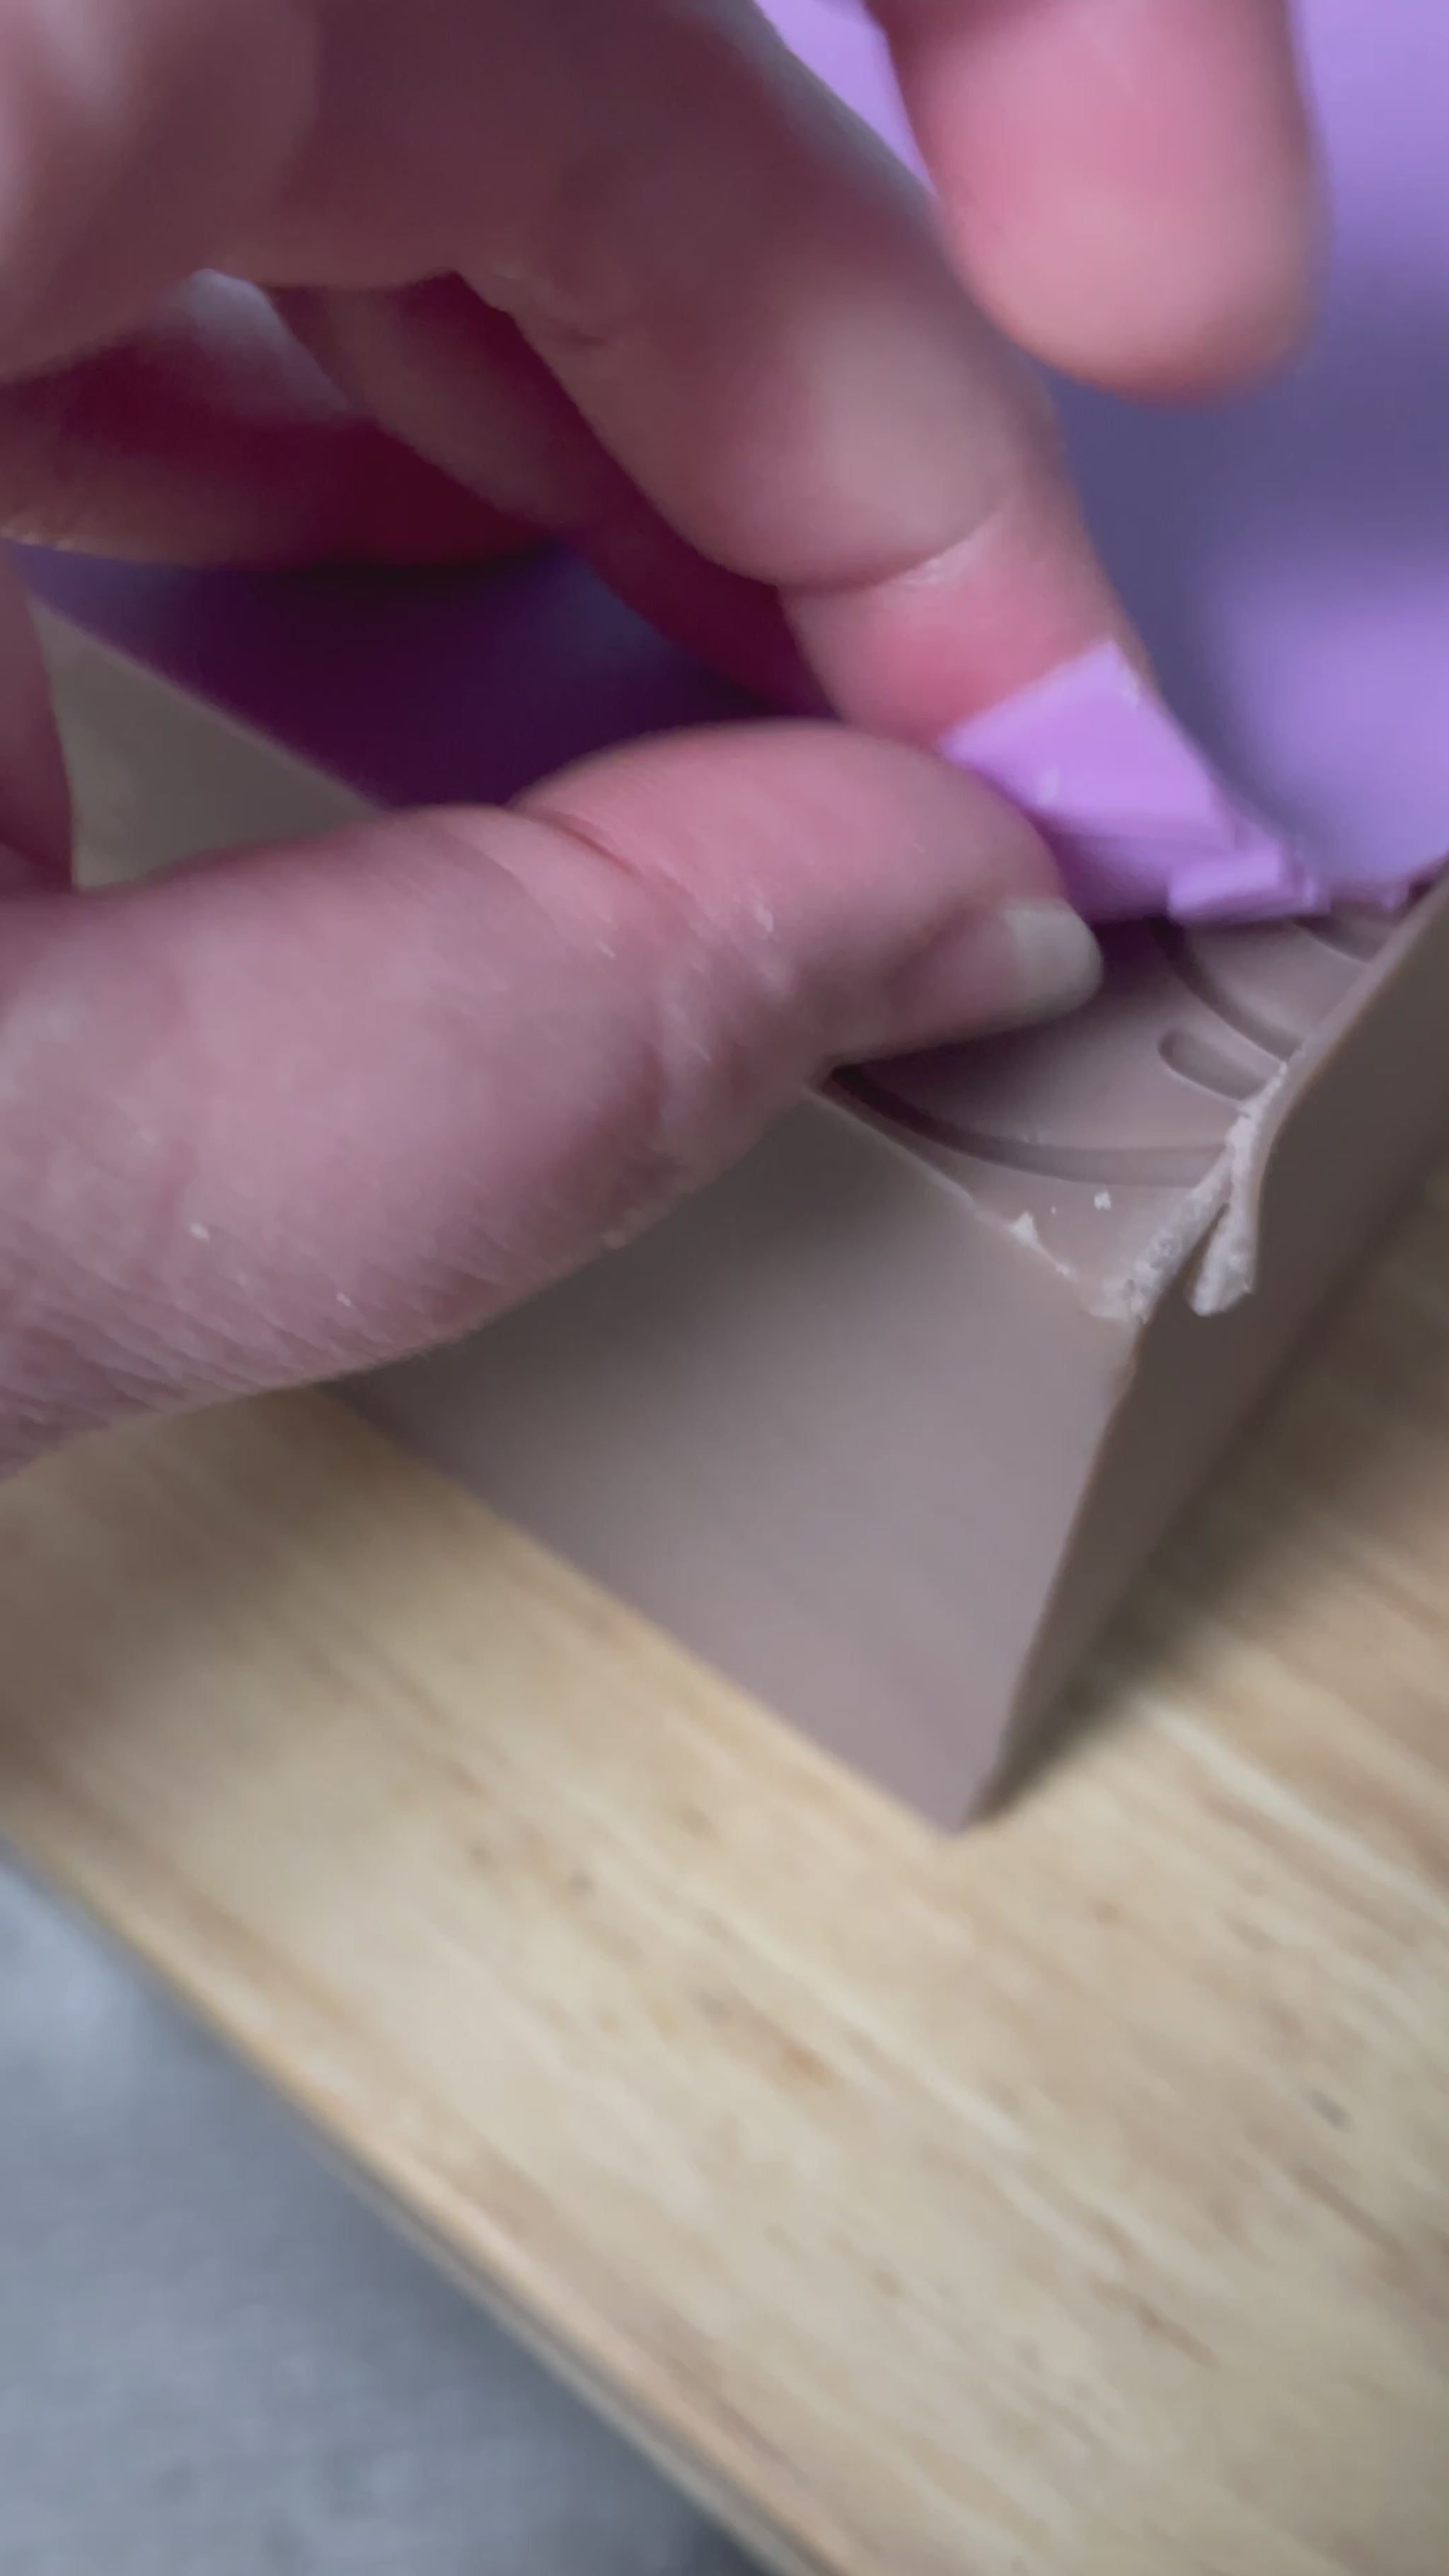 Video of peeling a texture mat off the top of lavender soap slab to show flower texture imprint